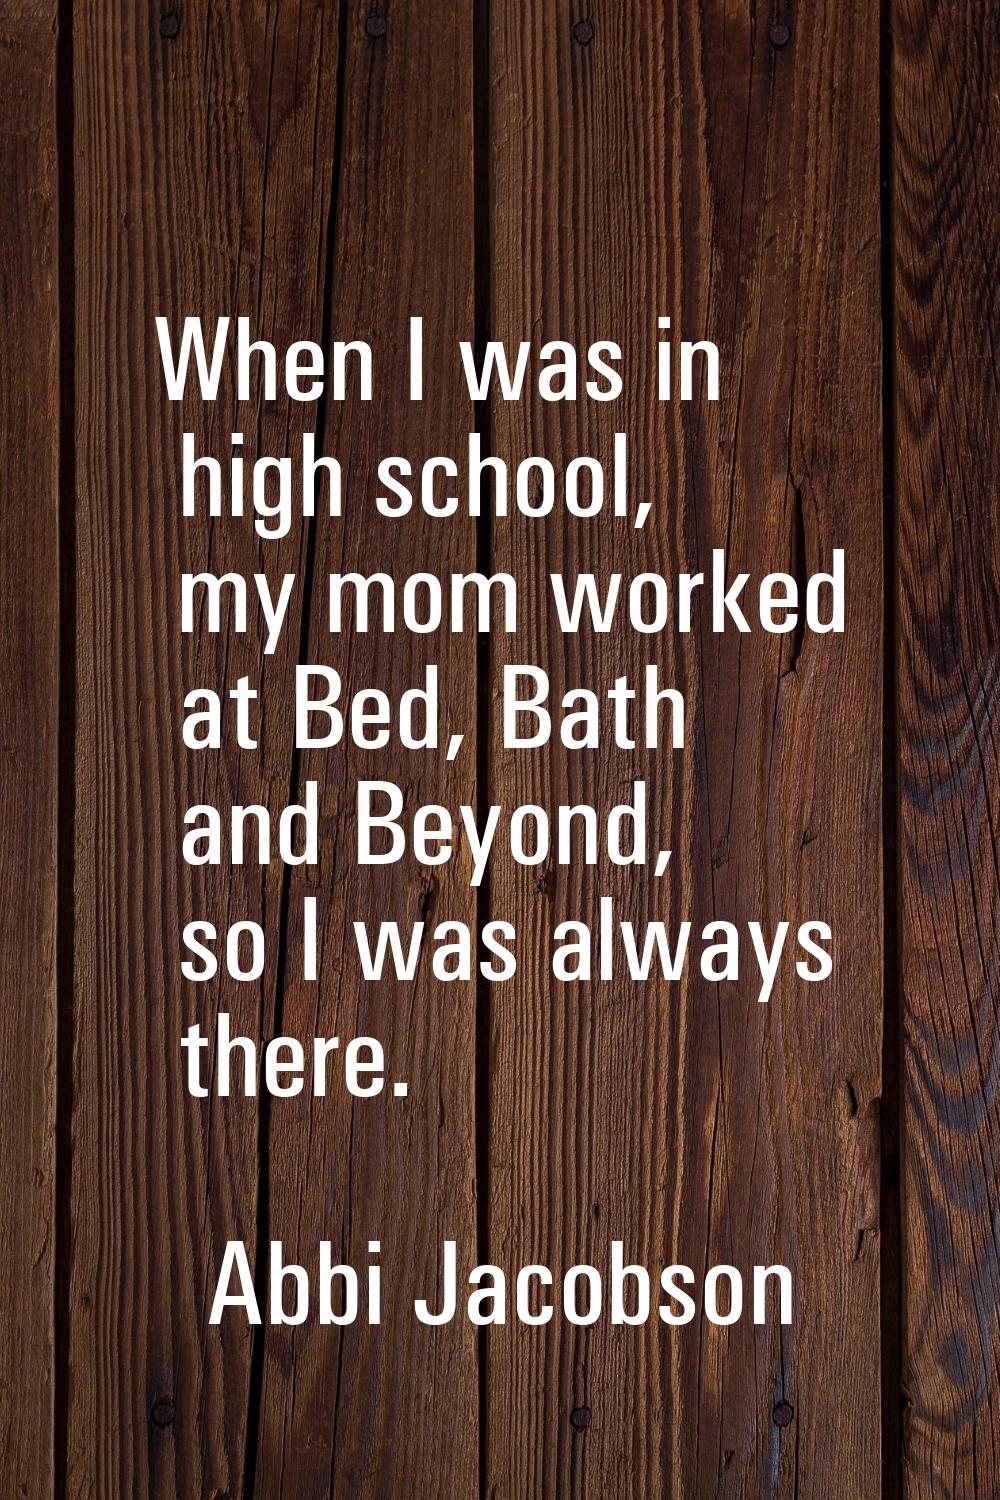 When I was in high school, my mom worked at Bed, Bath and Beyond, so I was always there.